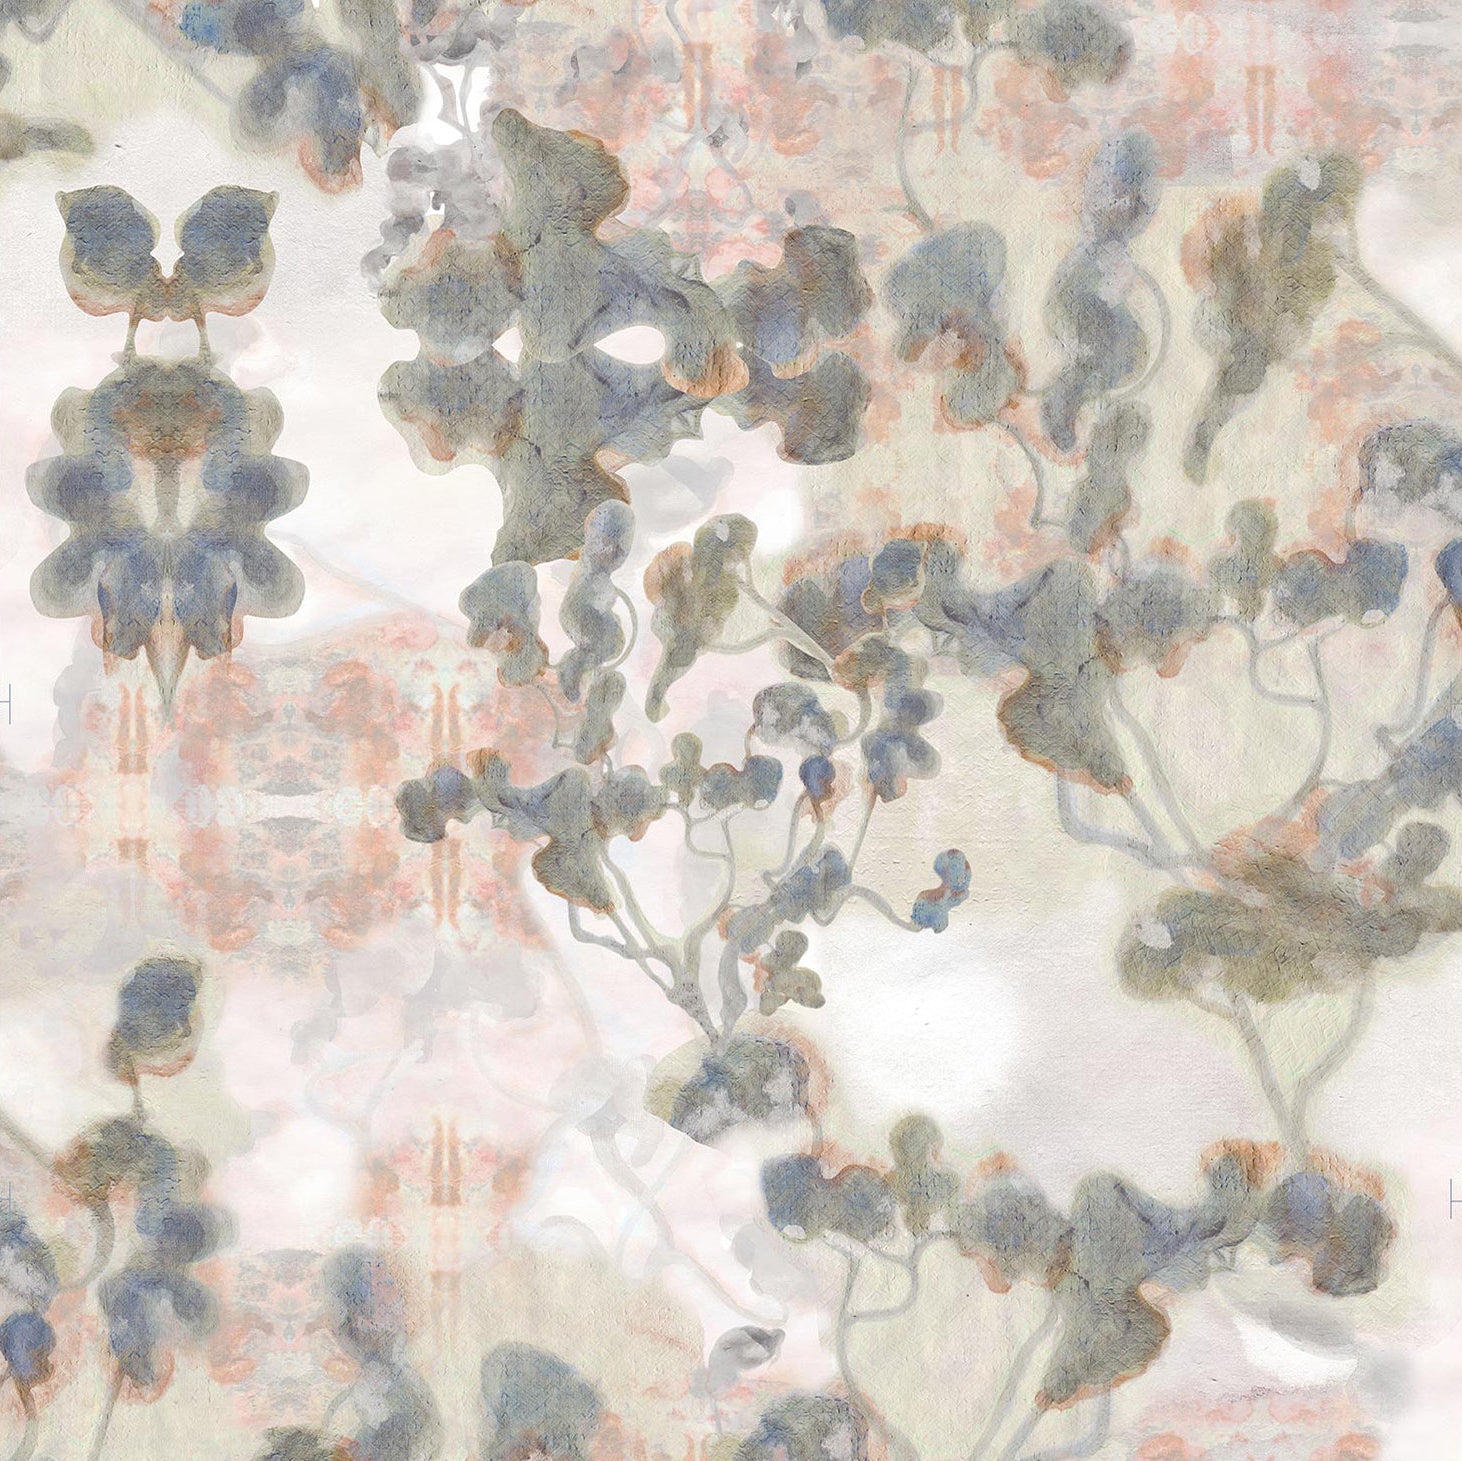 Detail of wallpaper in an abstract botanical print in gray, peach, tan and white.